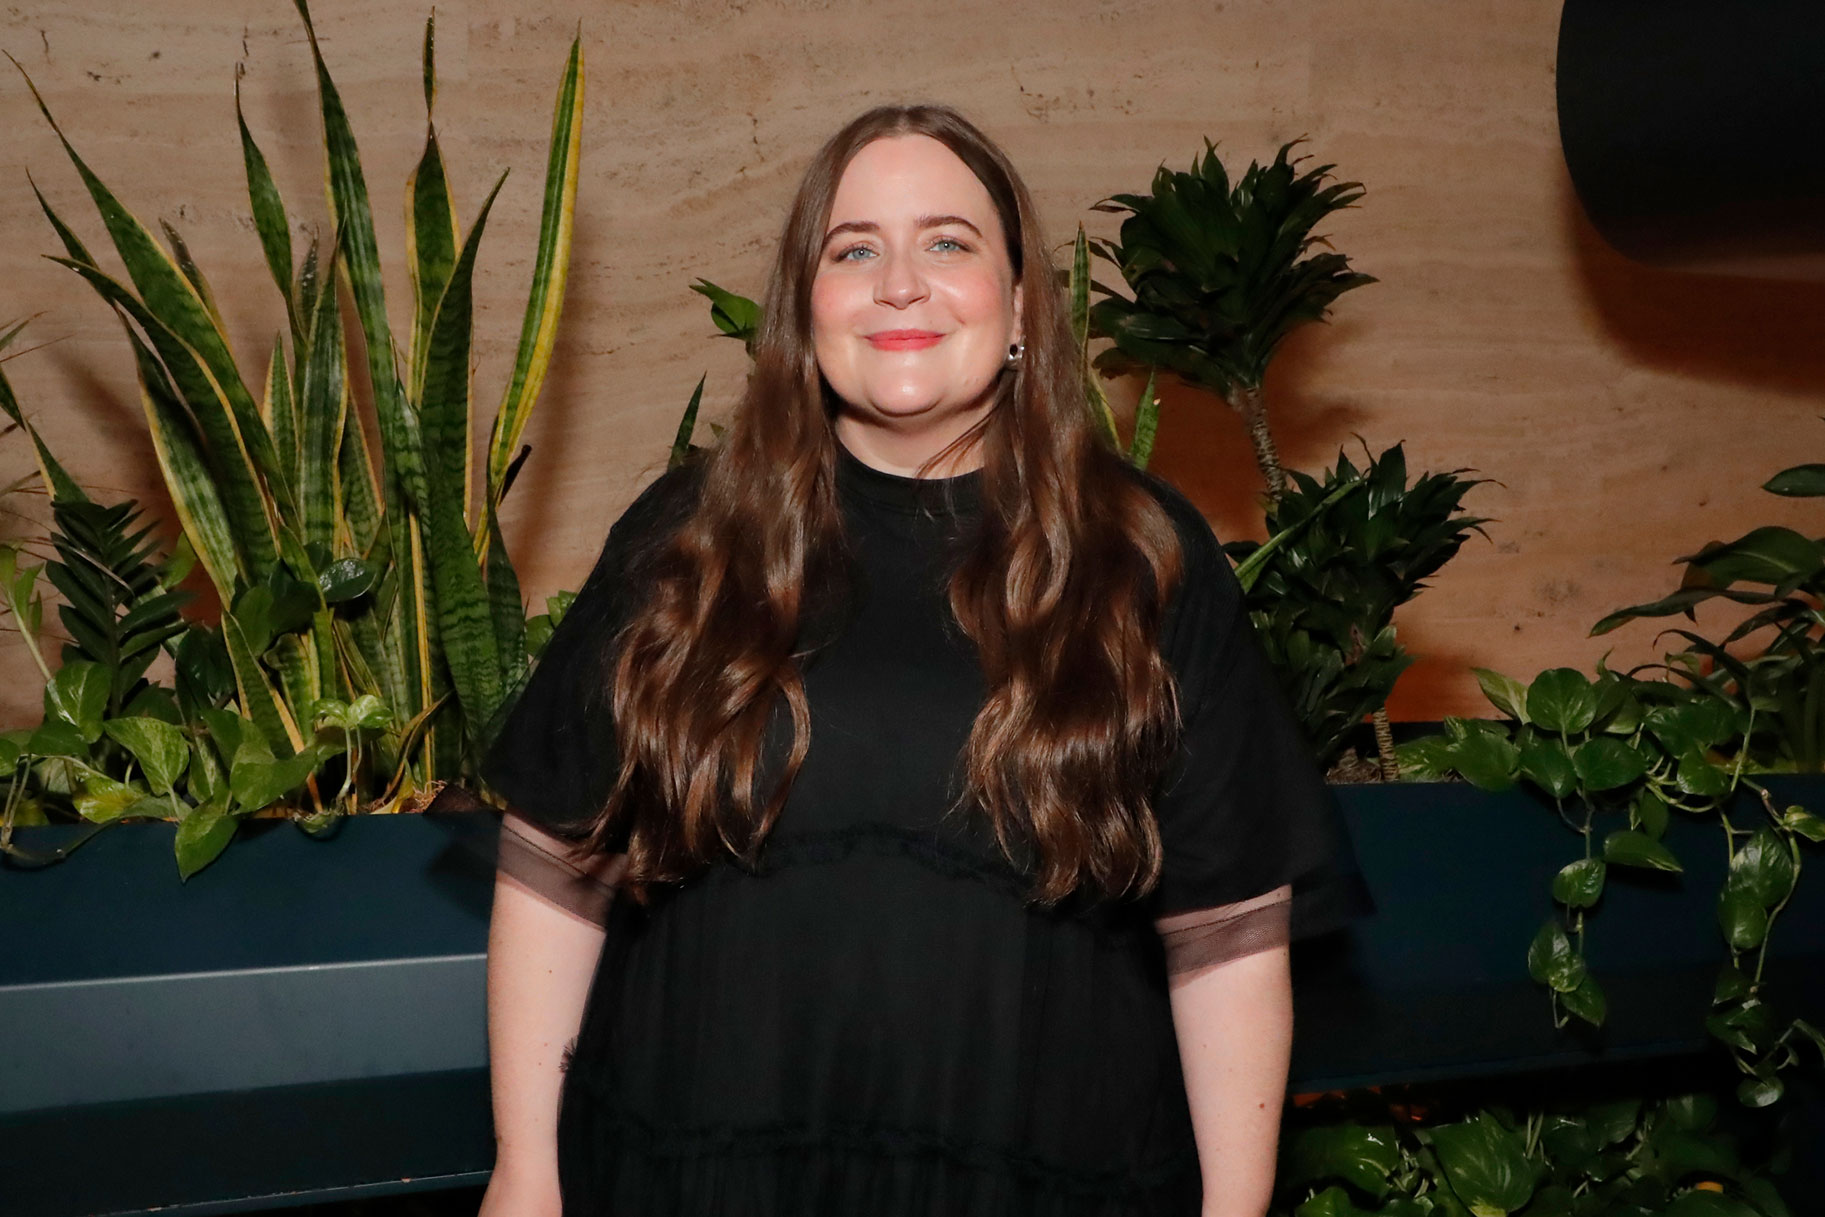 Aidy Bryant wearing a black dress and smiling at the camera